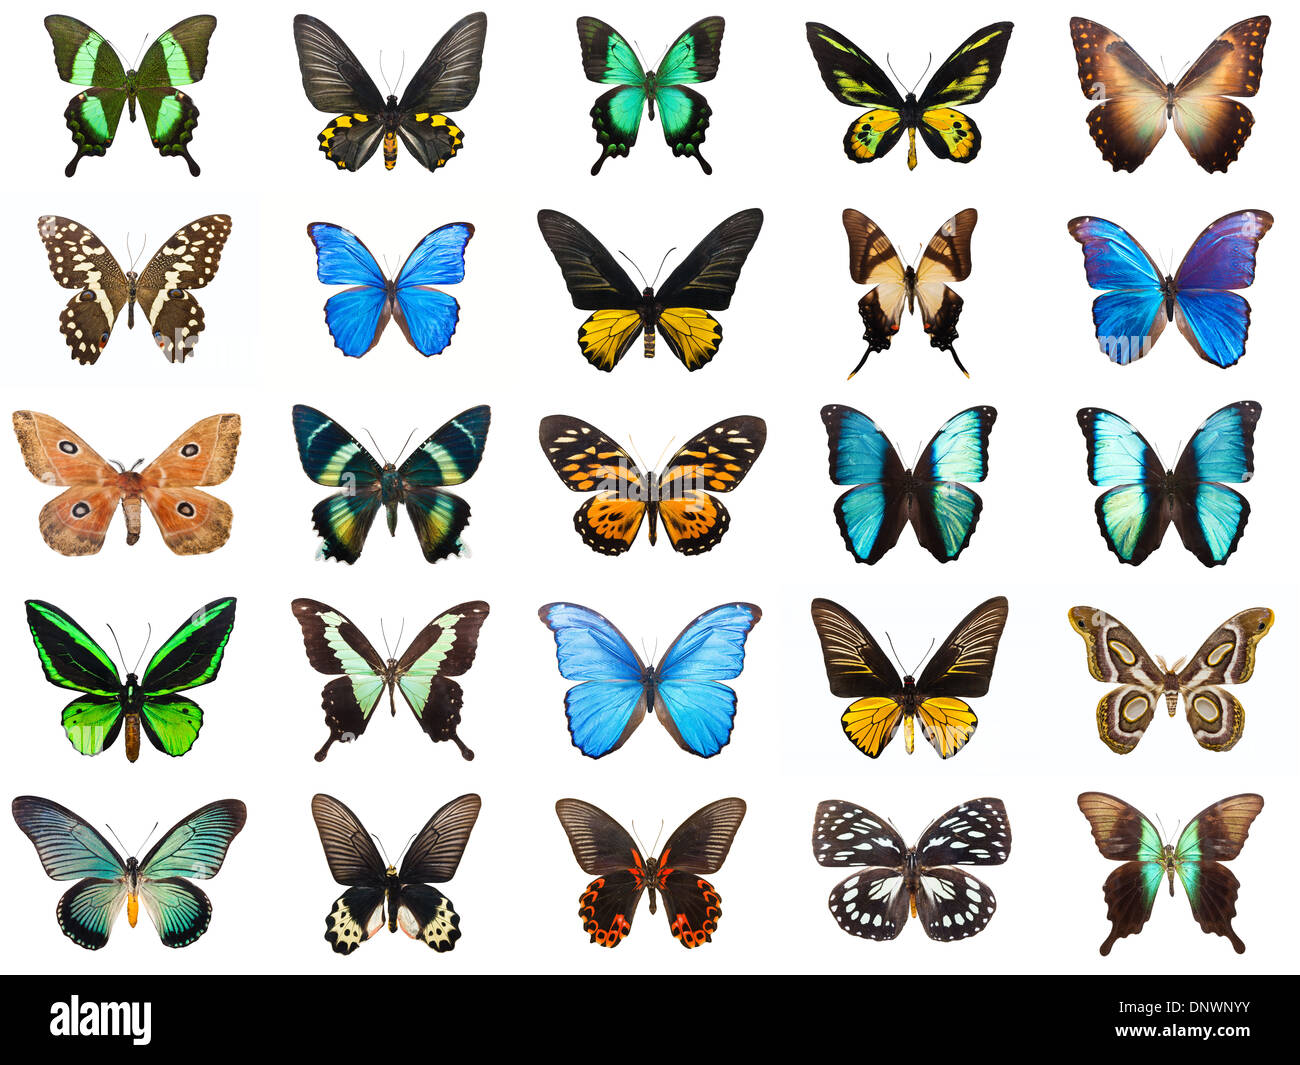 Tropical Butterflies High Resolution Stock Photography and Images ...